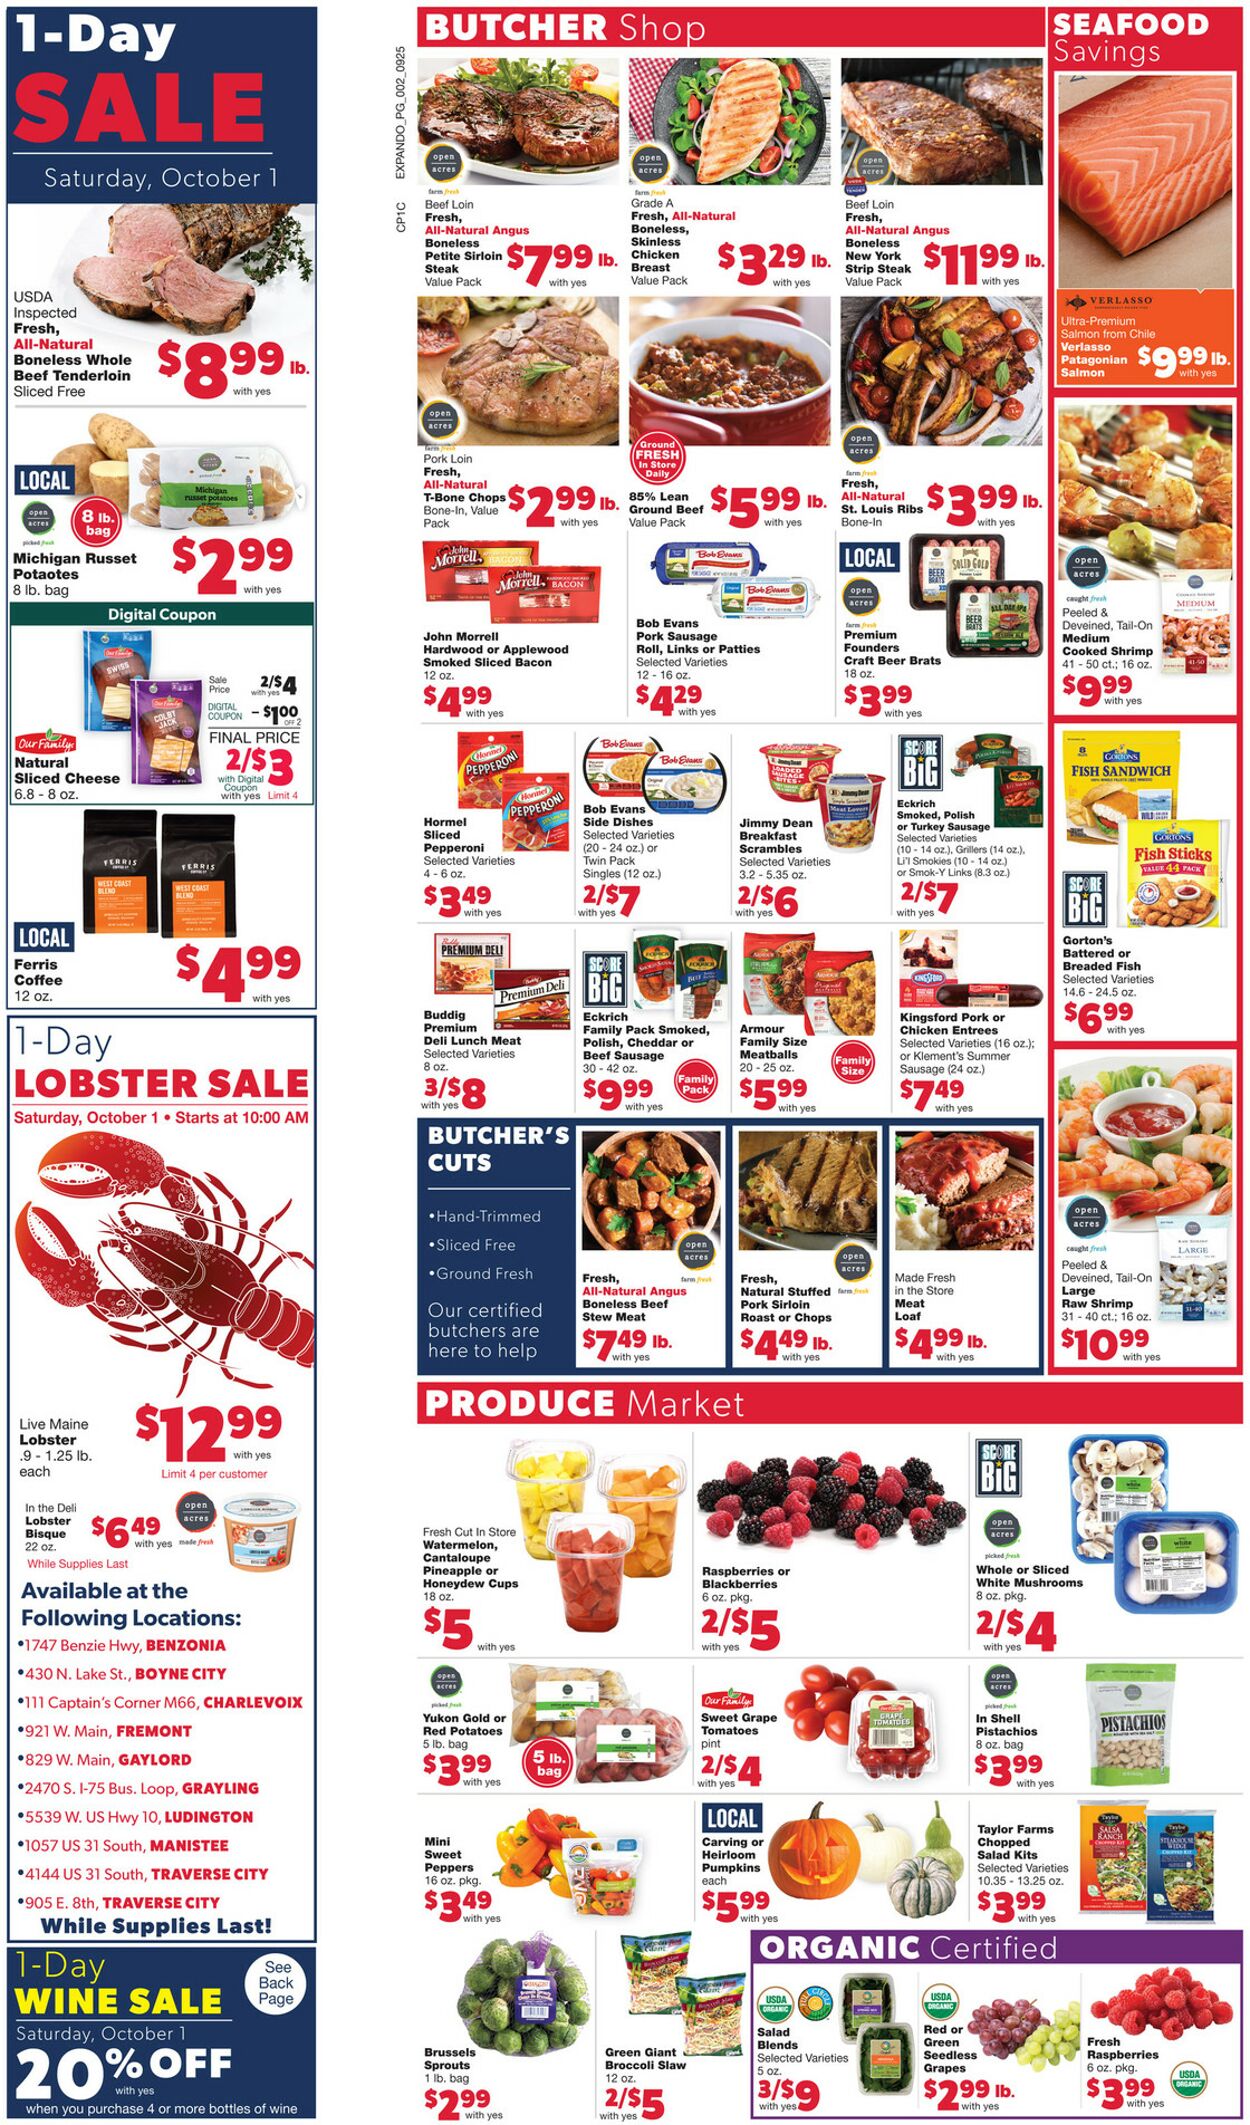 Weekly ad Family Fare 09/25/2022 - 10/01/2022